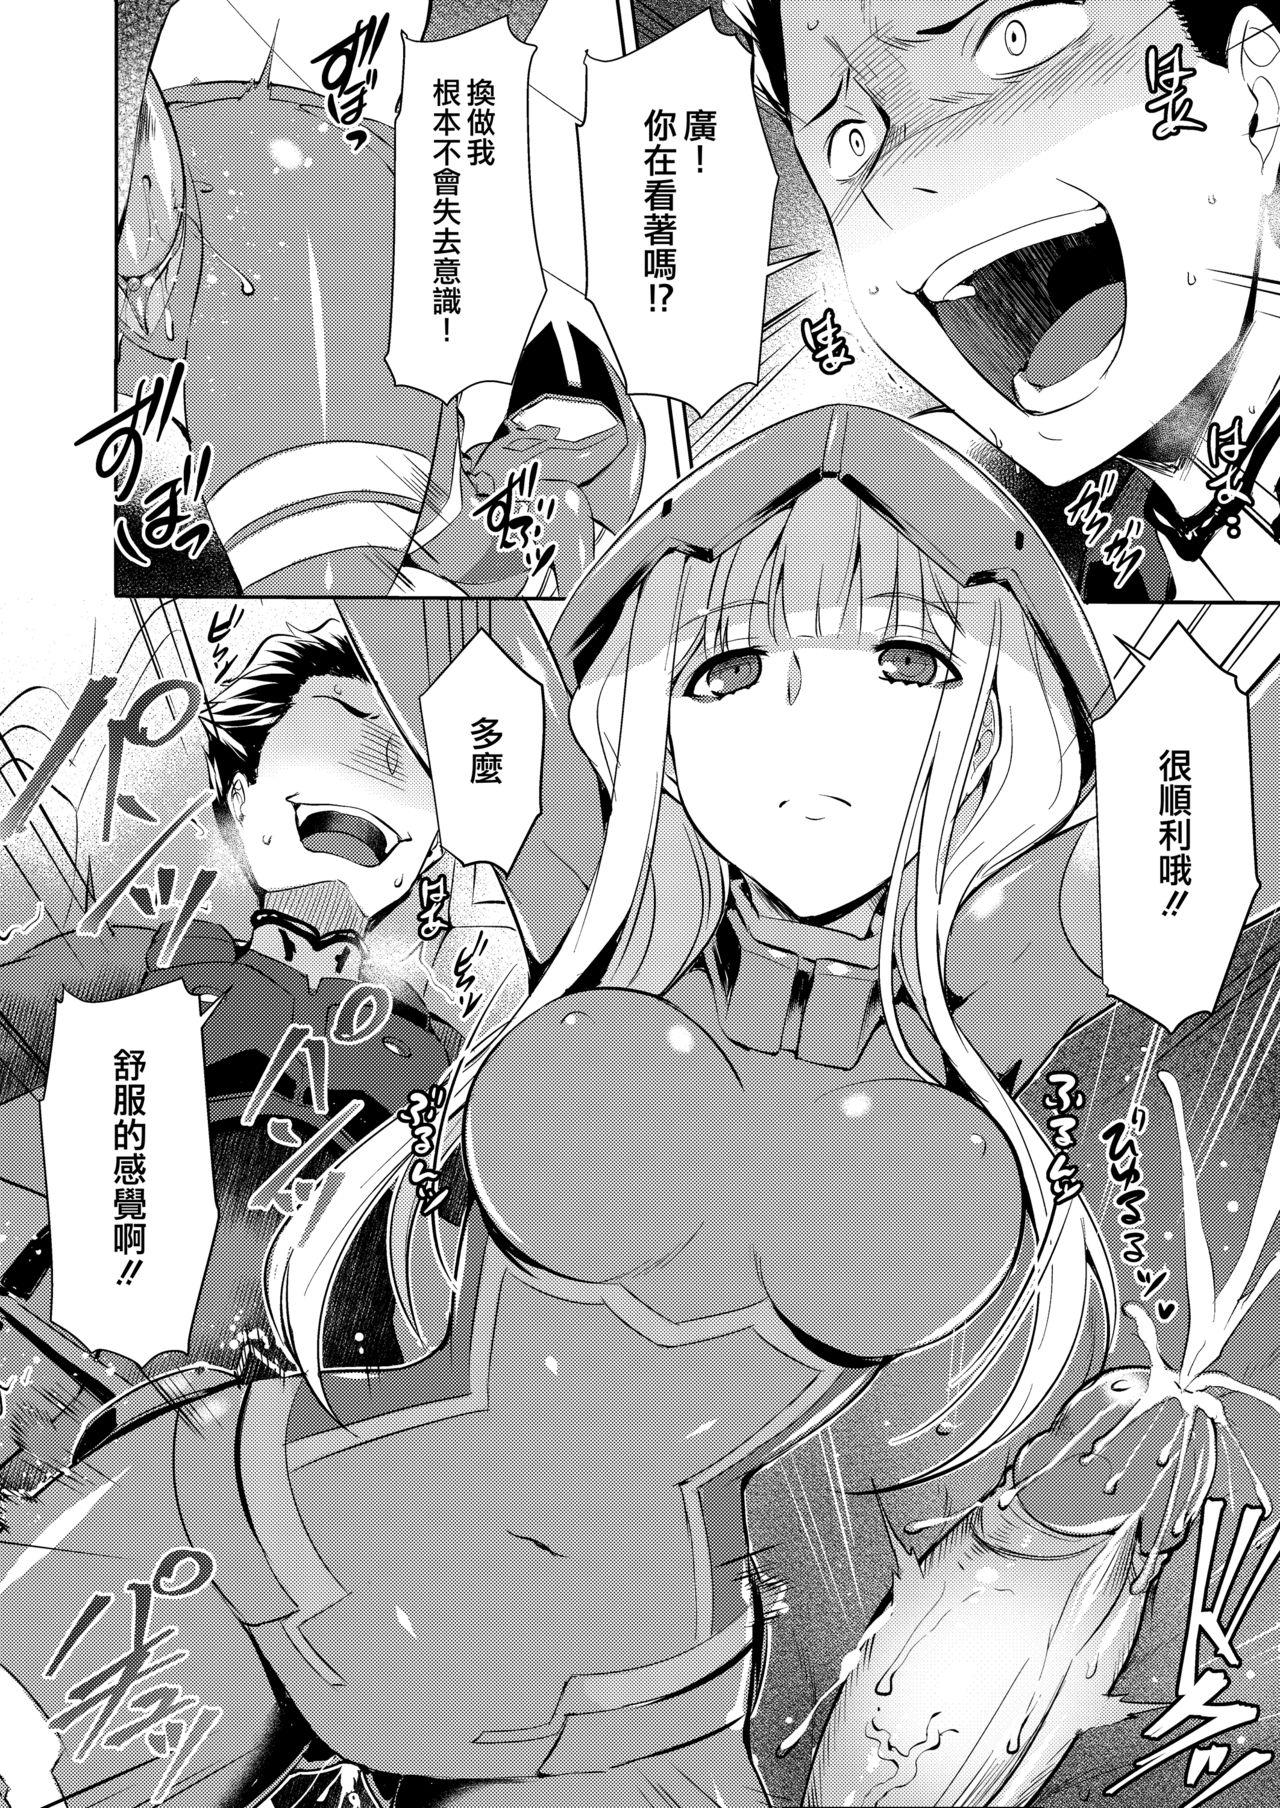 Pegging Mitsuru in the Zero Two - Darling in the franxx Amateur - Page 9